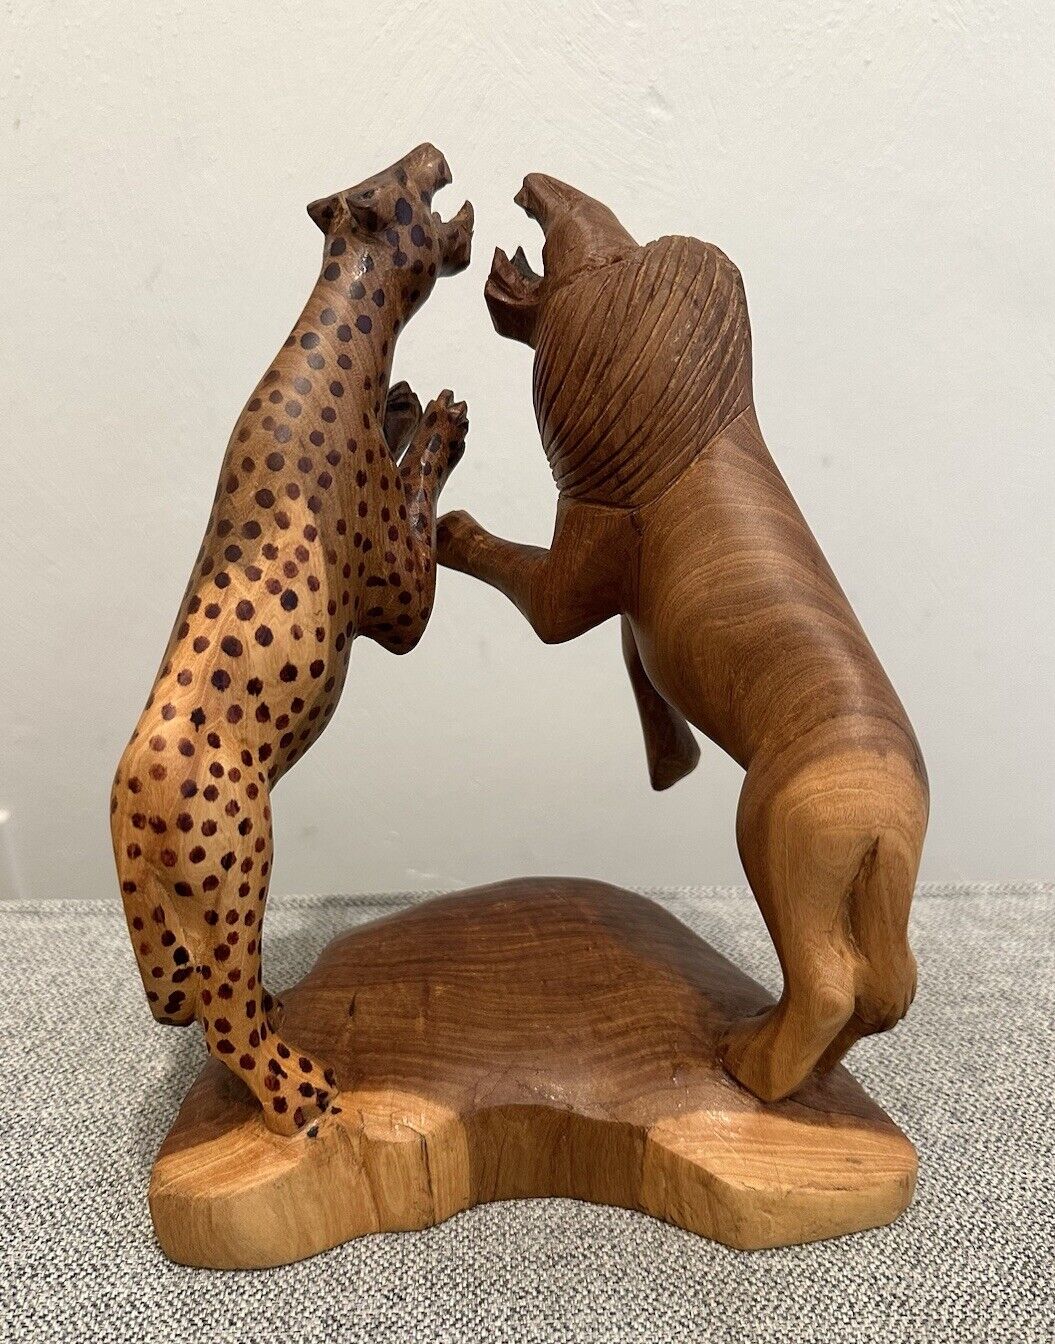 Vintage Hand Carved Wooden Lion & Cheetah Figurine Statue Fighting Hand Painted